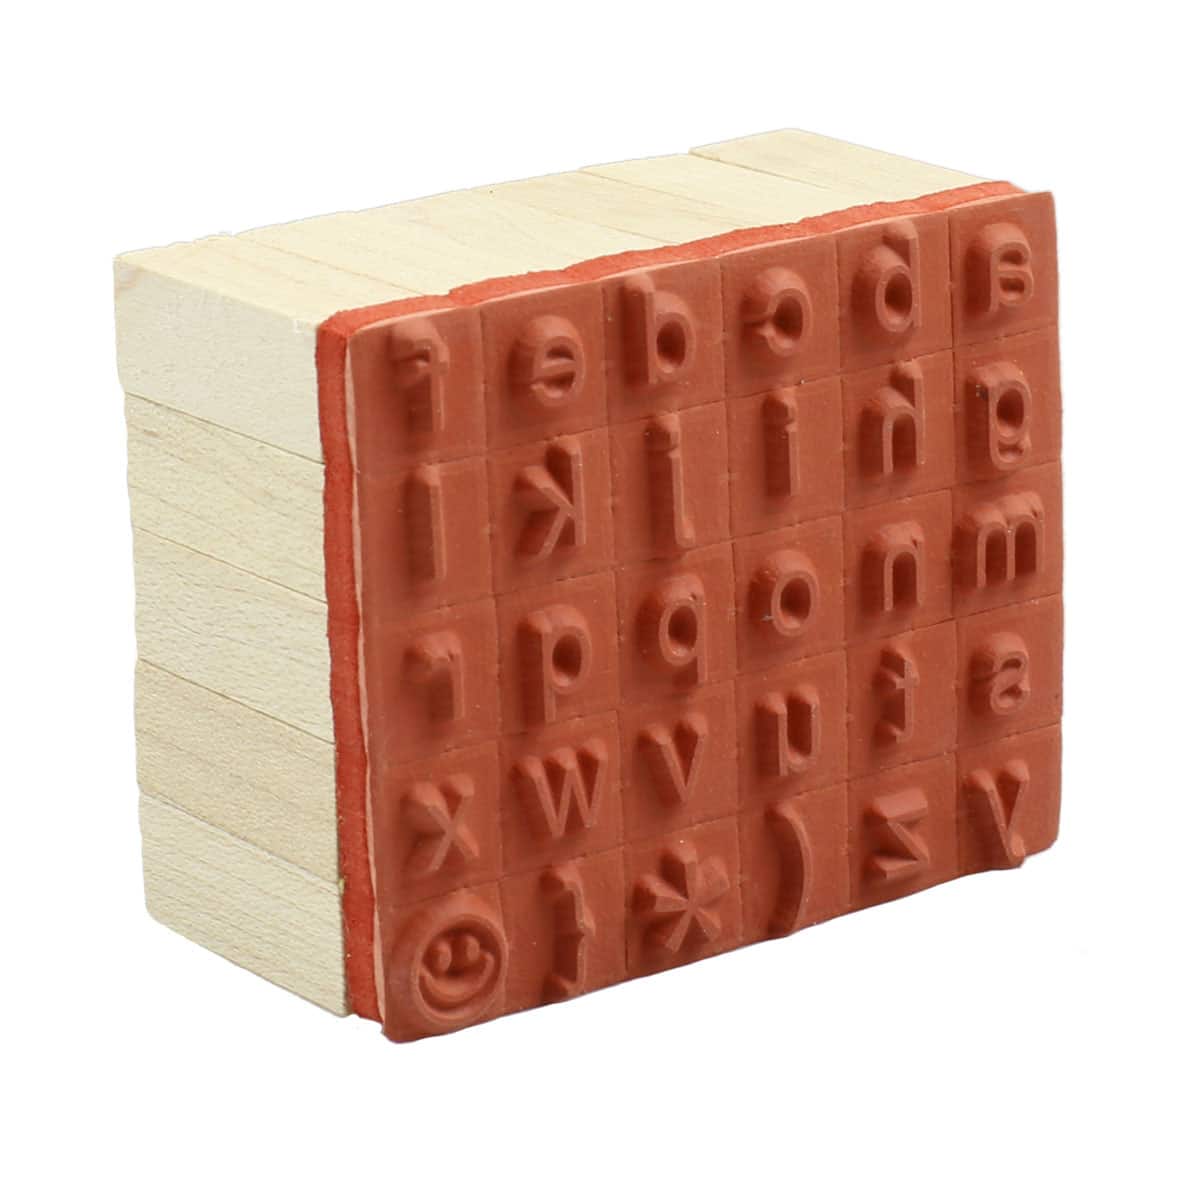 LAAT Creative Wooden English Alphabet Letter Stamps Stamper Capital Lower Case Boxes for Kids-Set of 30PCS